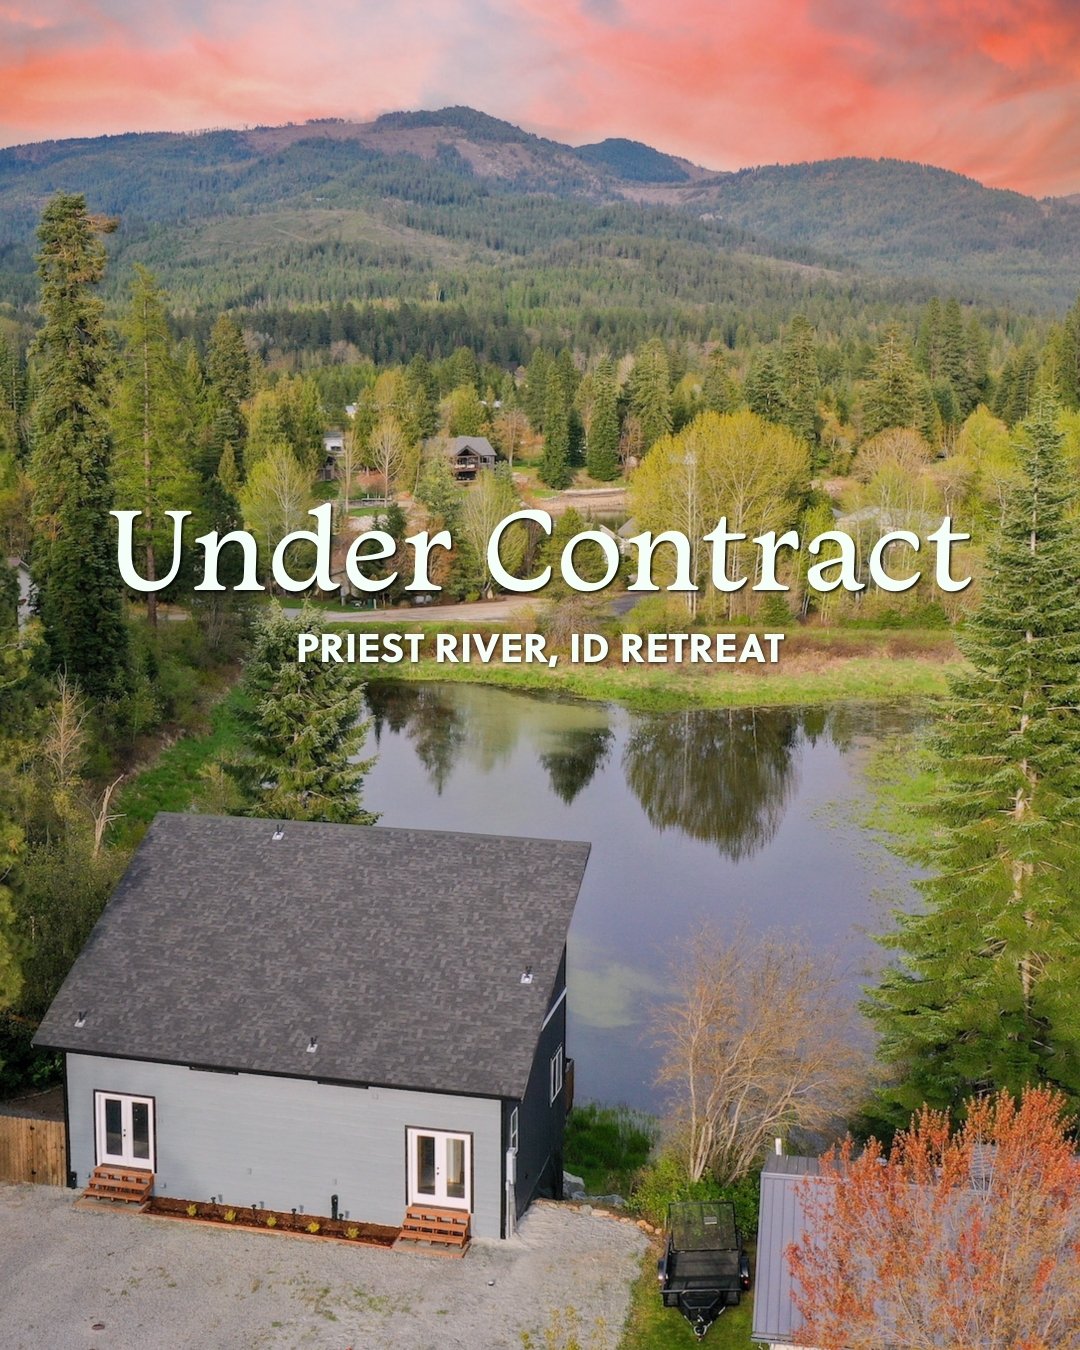 😱 The Priest River Retreat was under contract within a mere 24 hours!

How does this happen?

✅ We made sure the house was READY.
We walked through this home with the sellers and shared insight on opportunities to update/finish work to highlight its